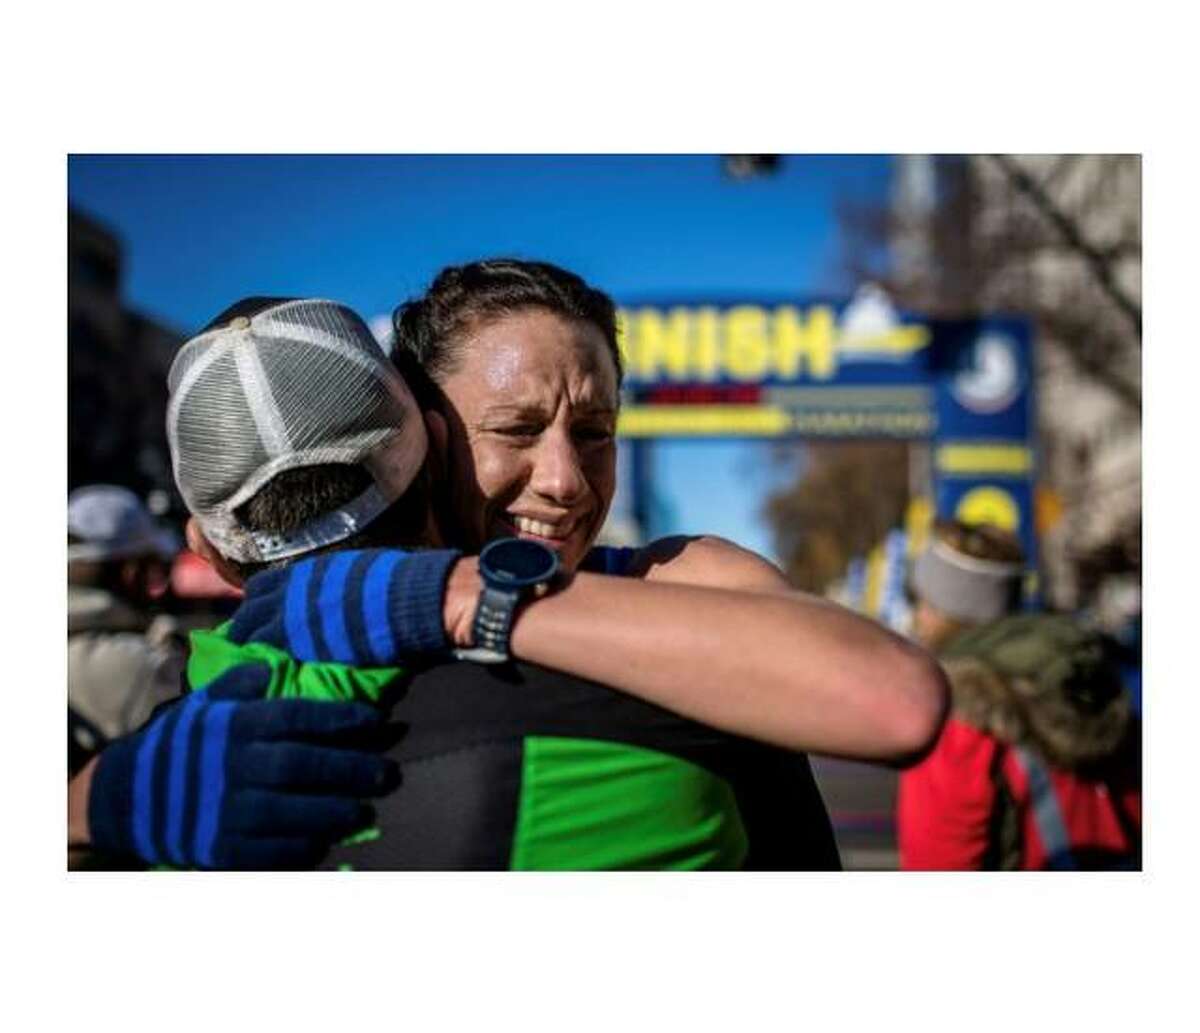 Edwardsville resident Crystal Harriss, right, hugs her coach, James McKirdy, after finding out that her time of 2:44.49 in the California International Marathon on Dec. 2, 2018, qualified her for the U.S. Olympic Marathon Trials, scheduled for Saturday in Atlanta.